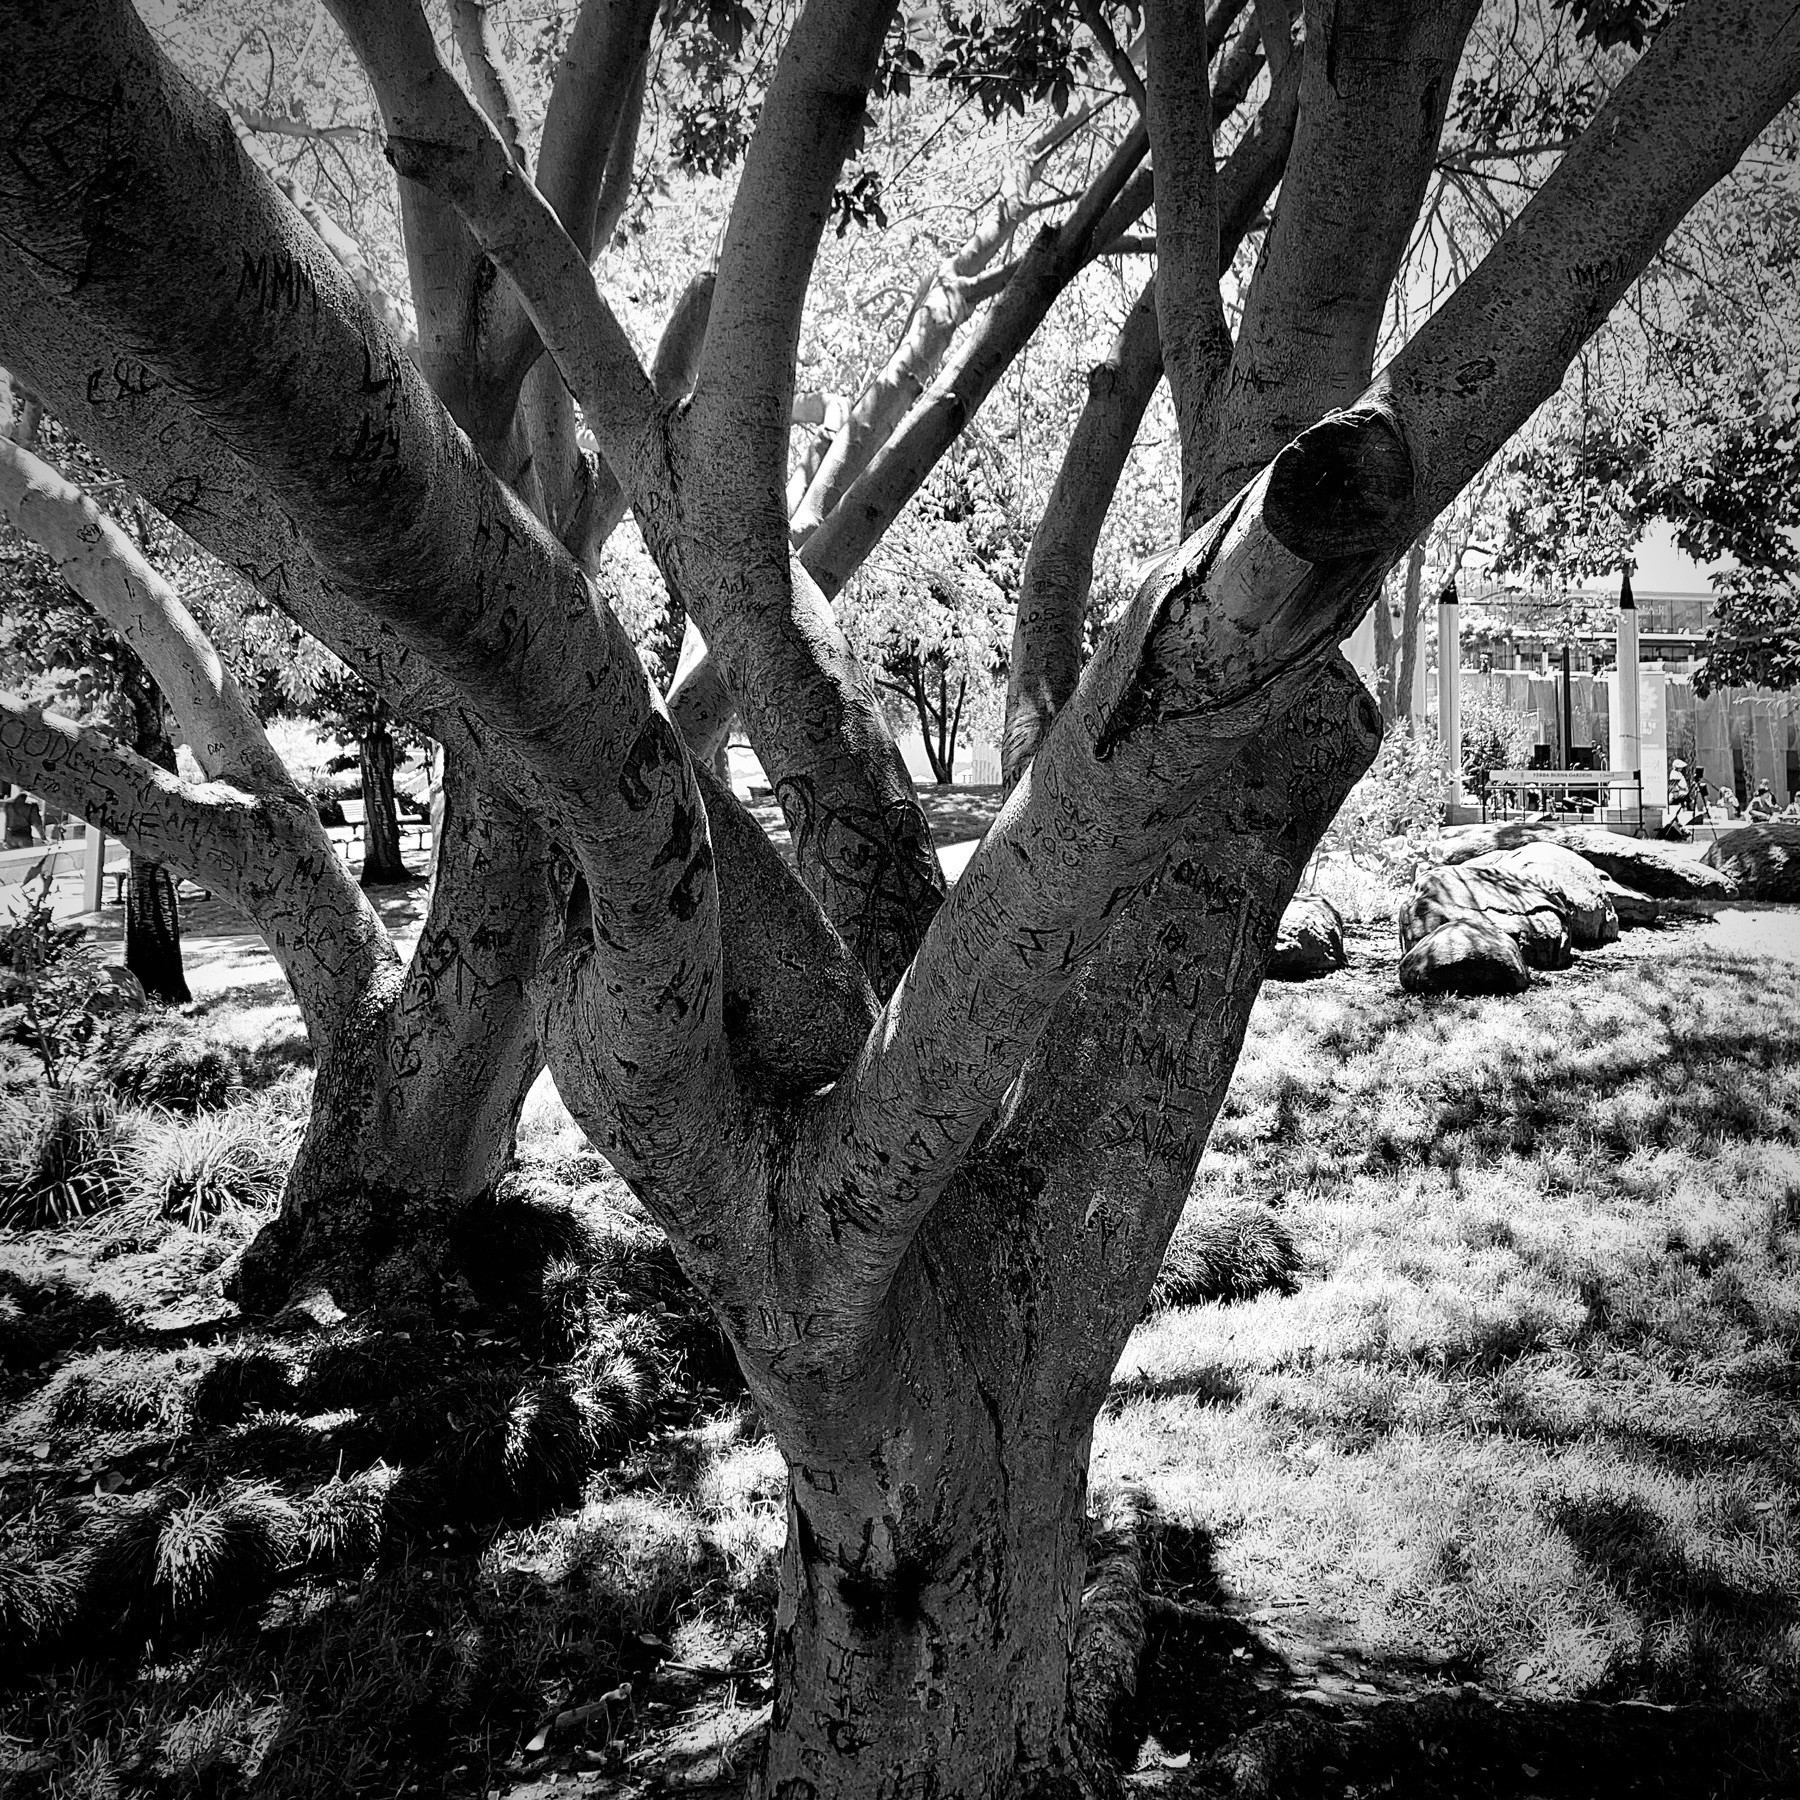 Close-up black and white tree trunk with many branches.